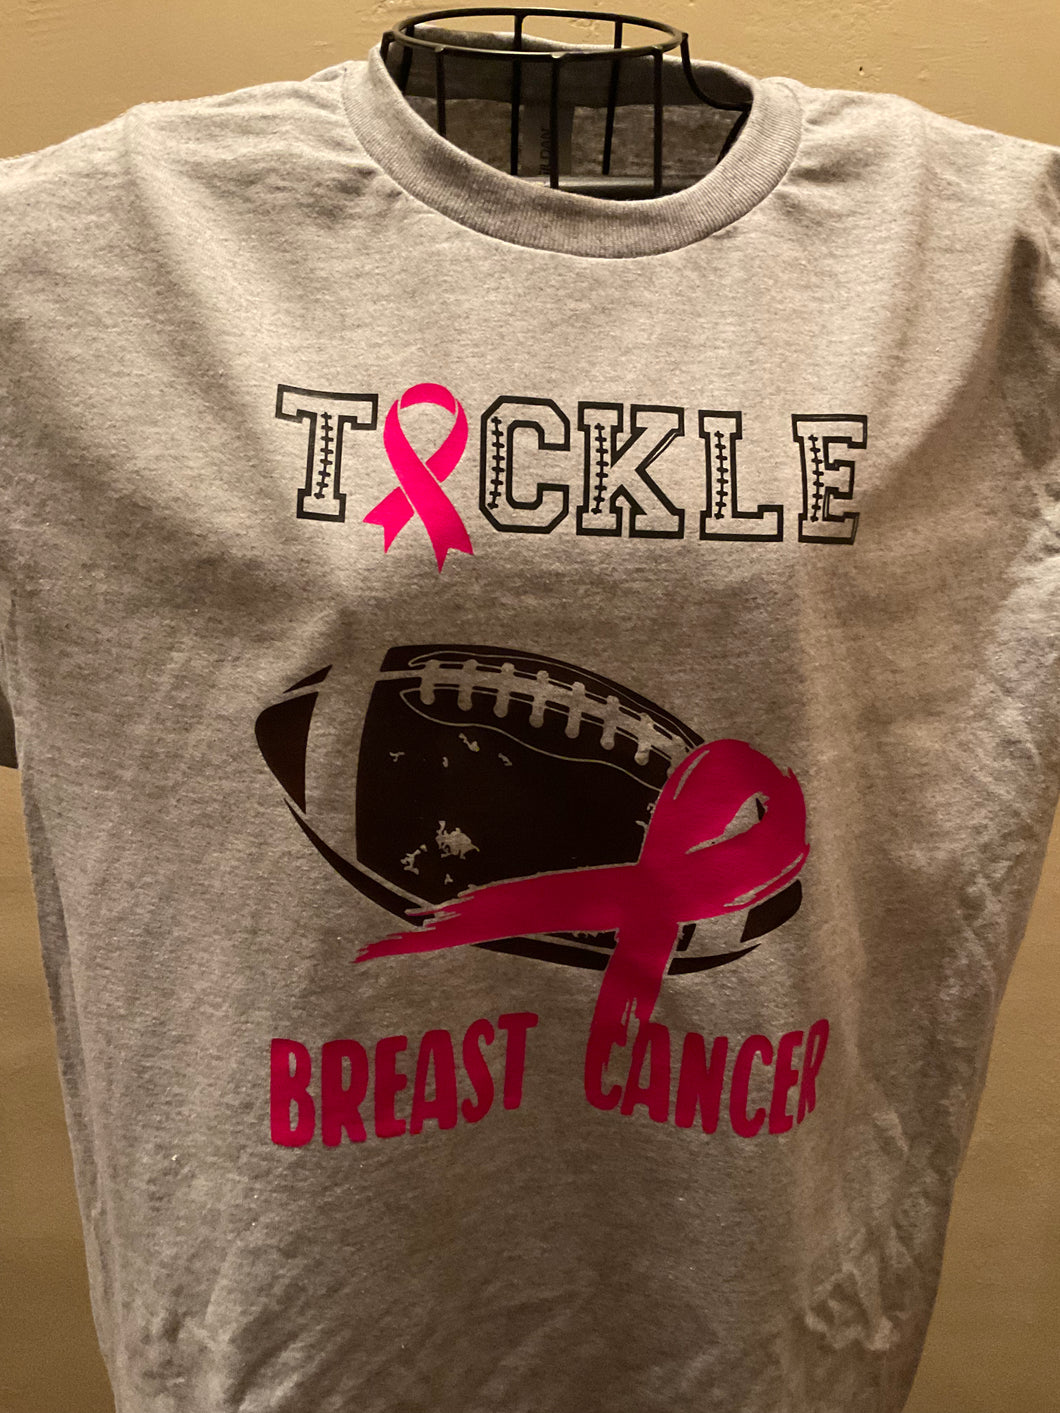 Tackle Breast Cancer 2